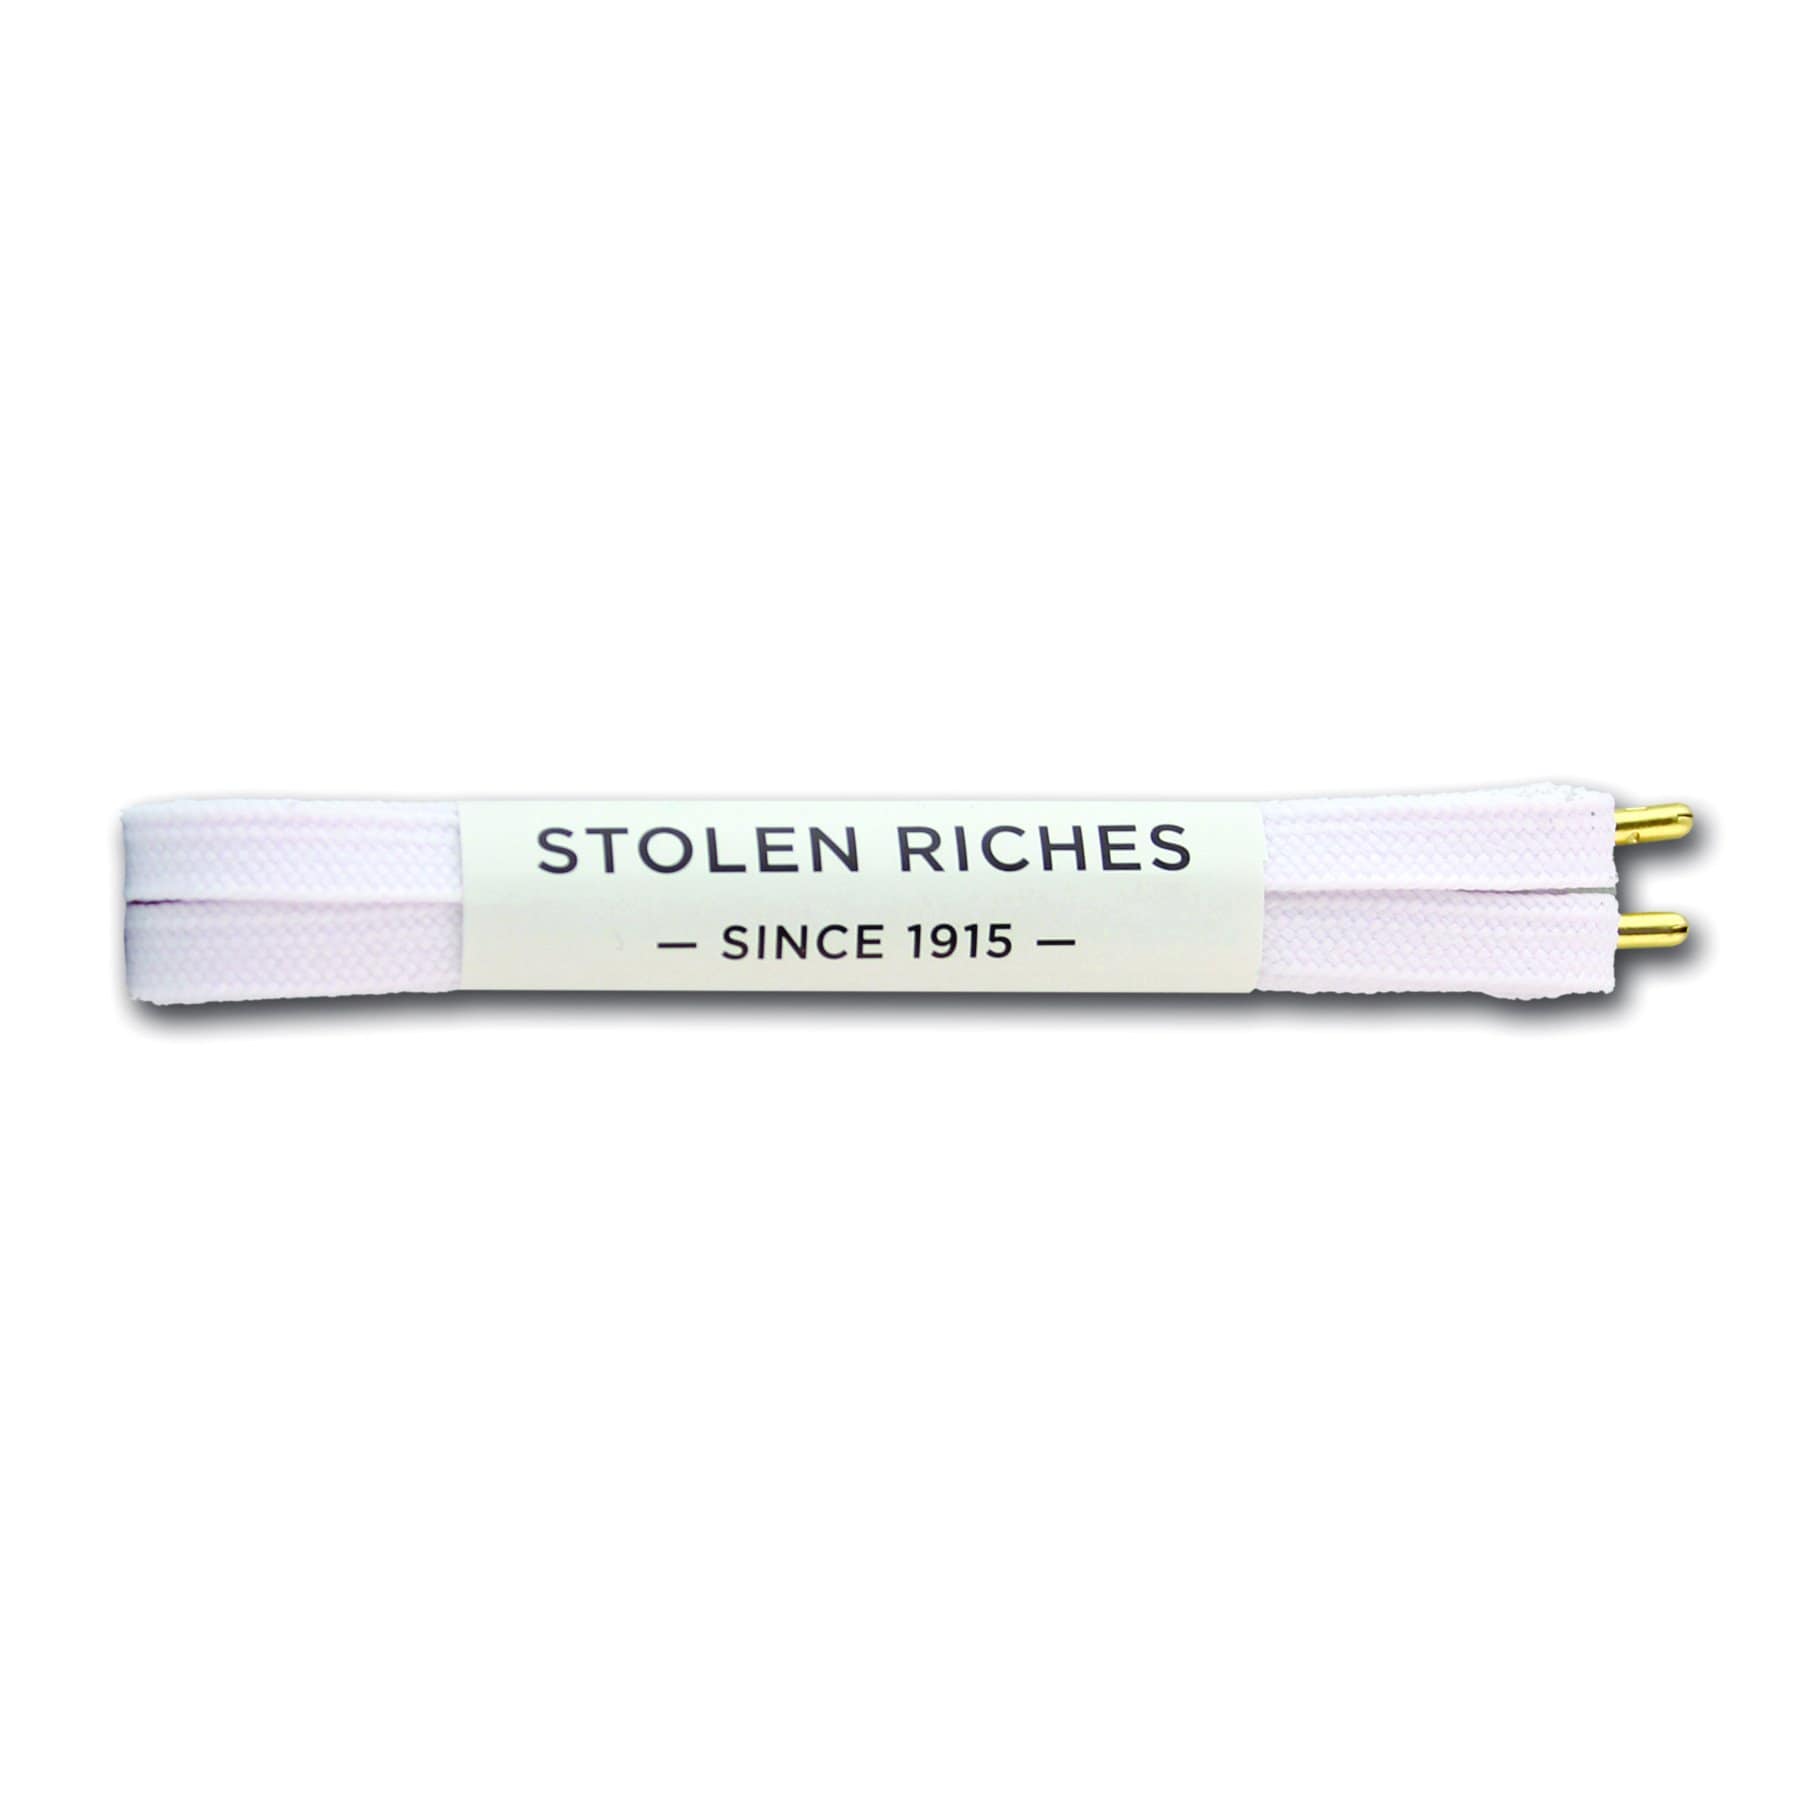 White laces for sneakers (Length: 45"/114cm) - Stolen Riches